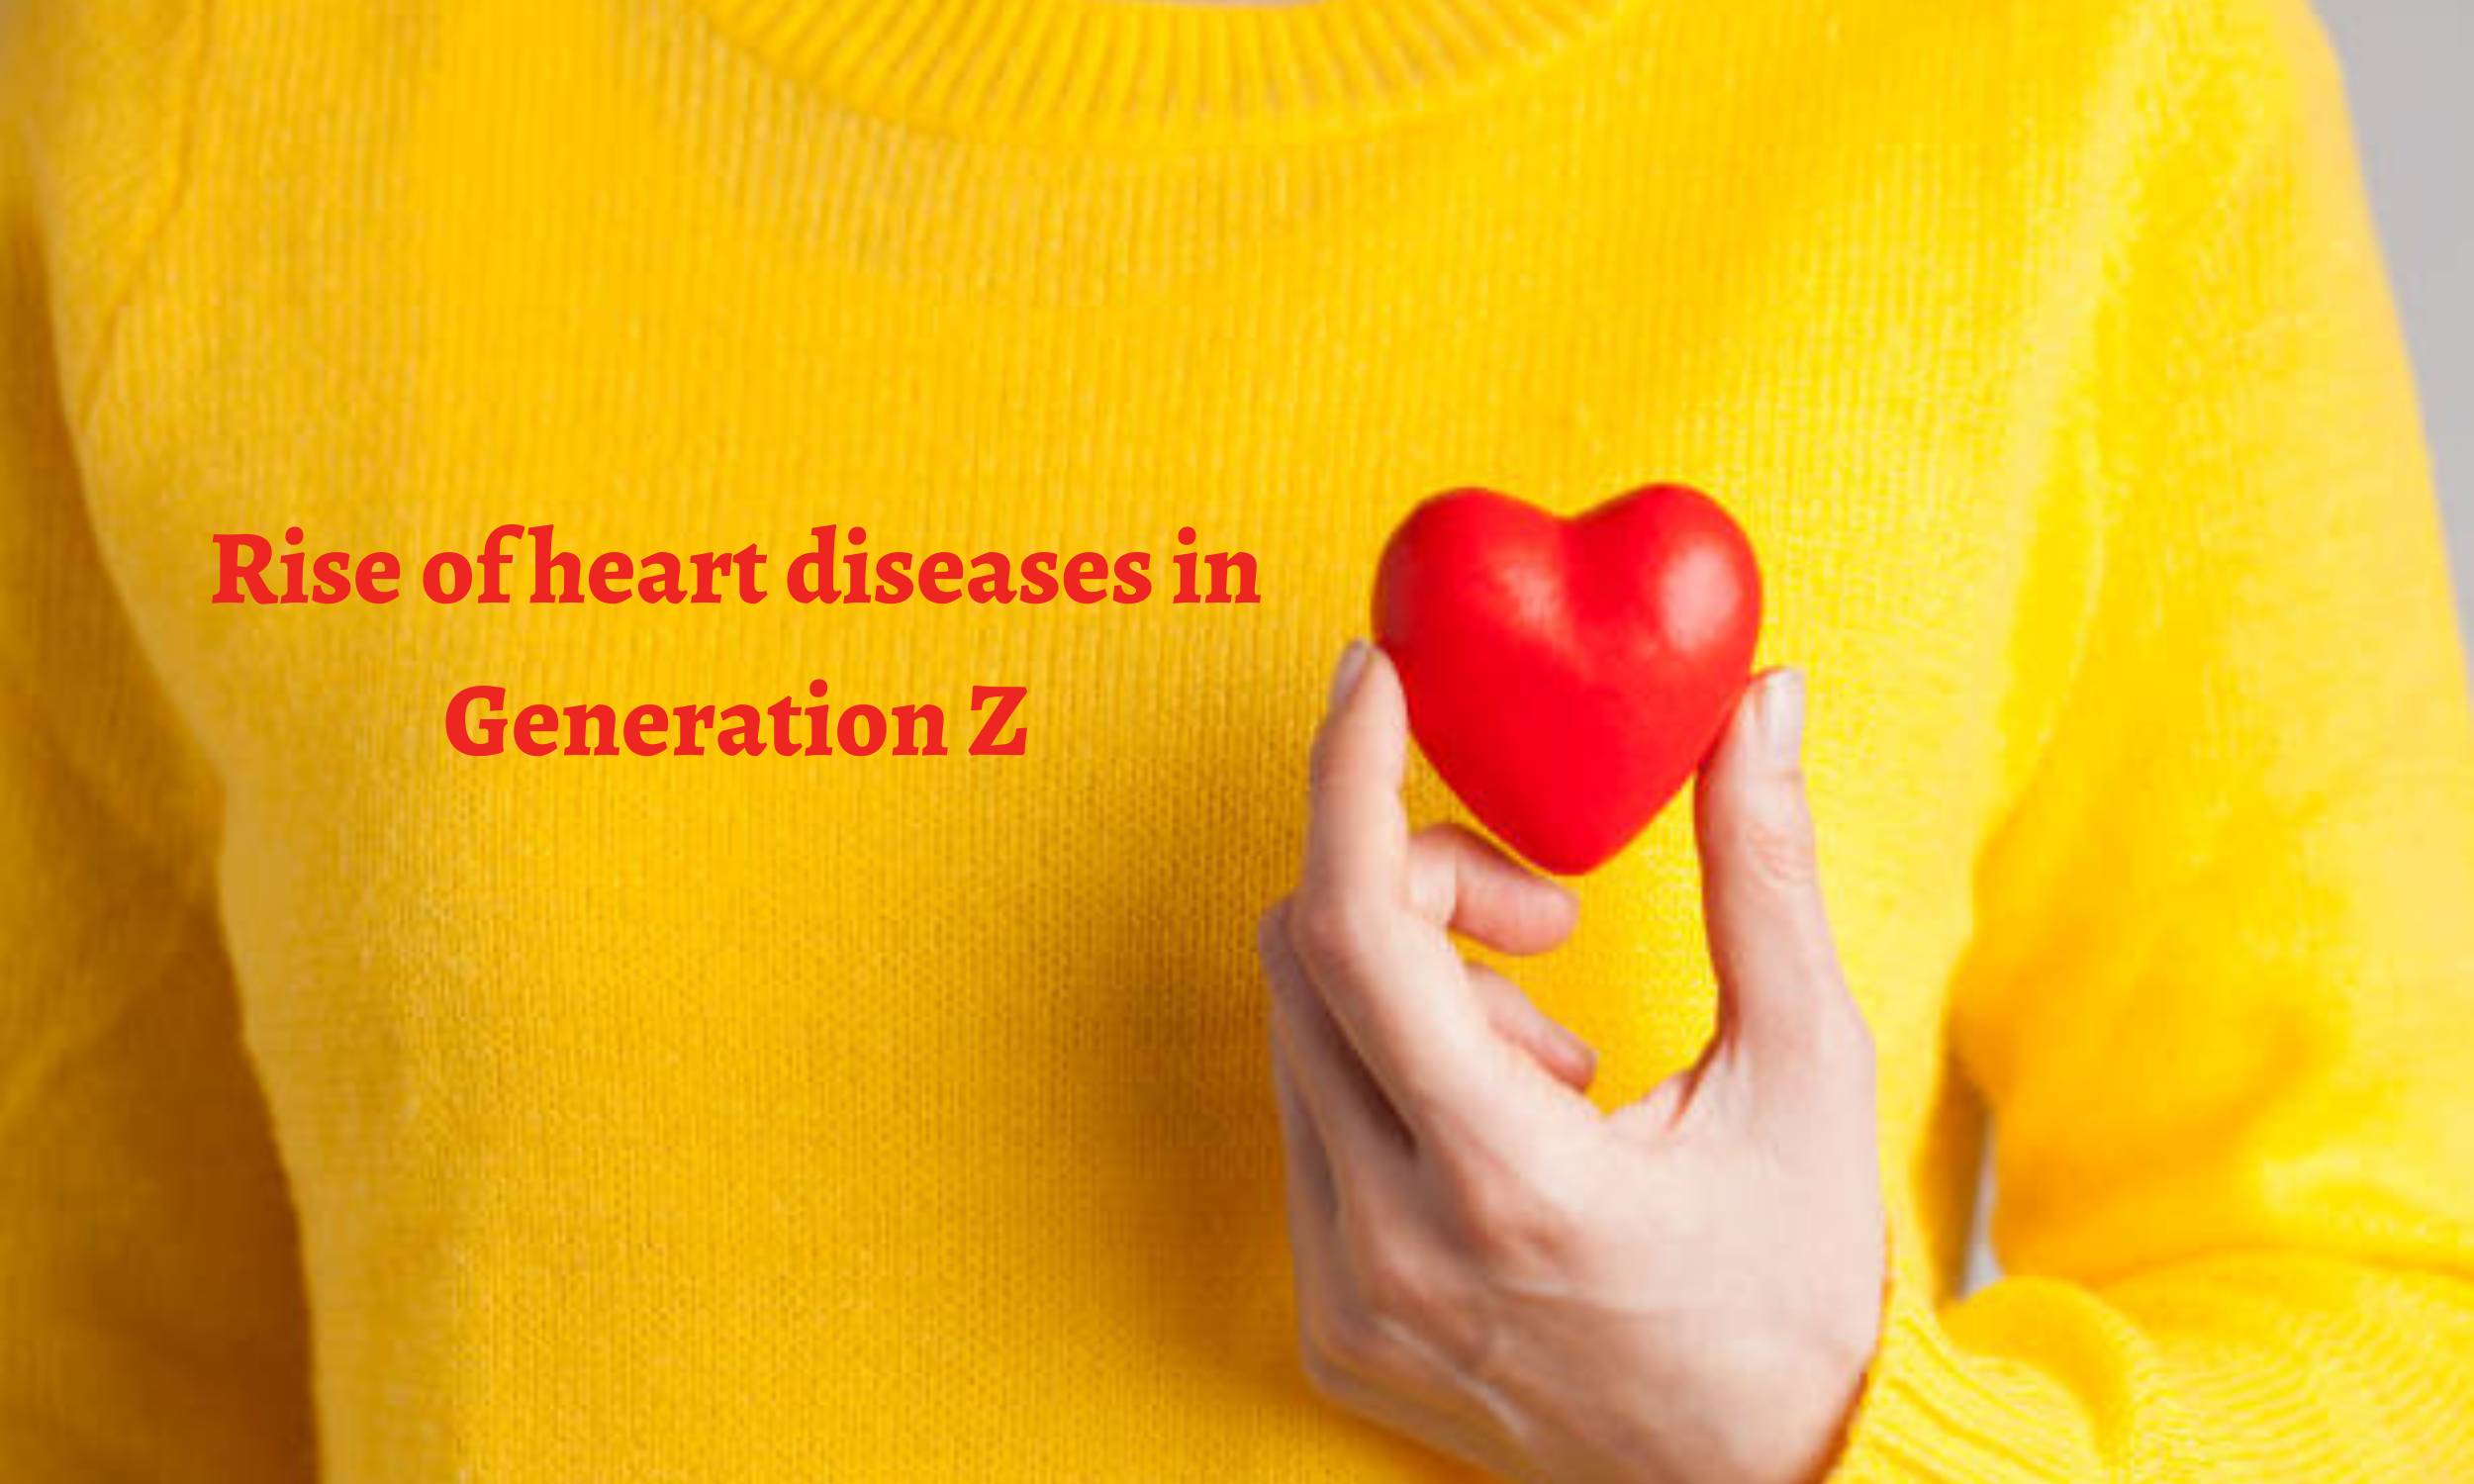 Heart diseases are on rise in young adults